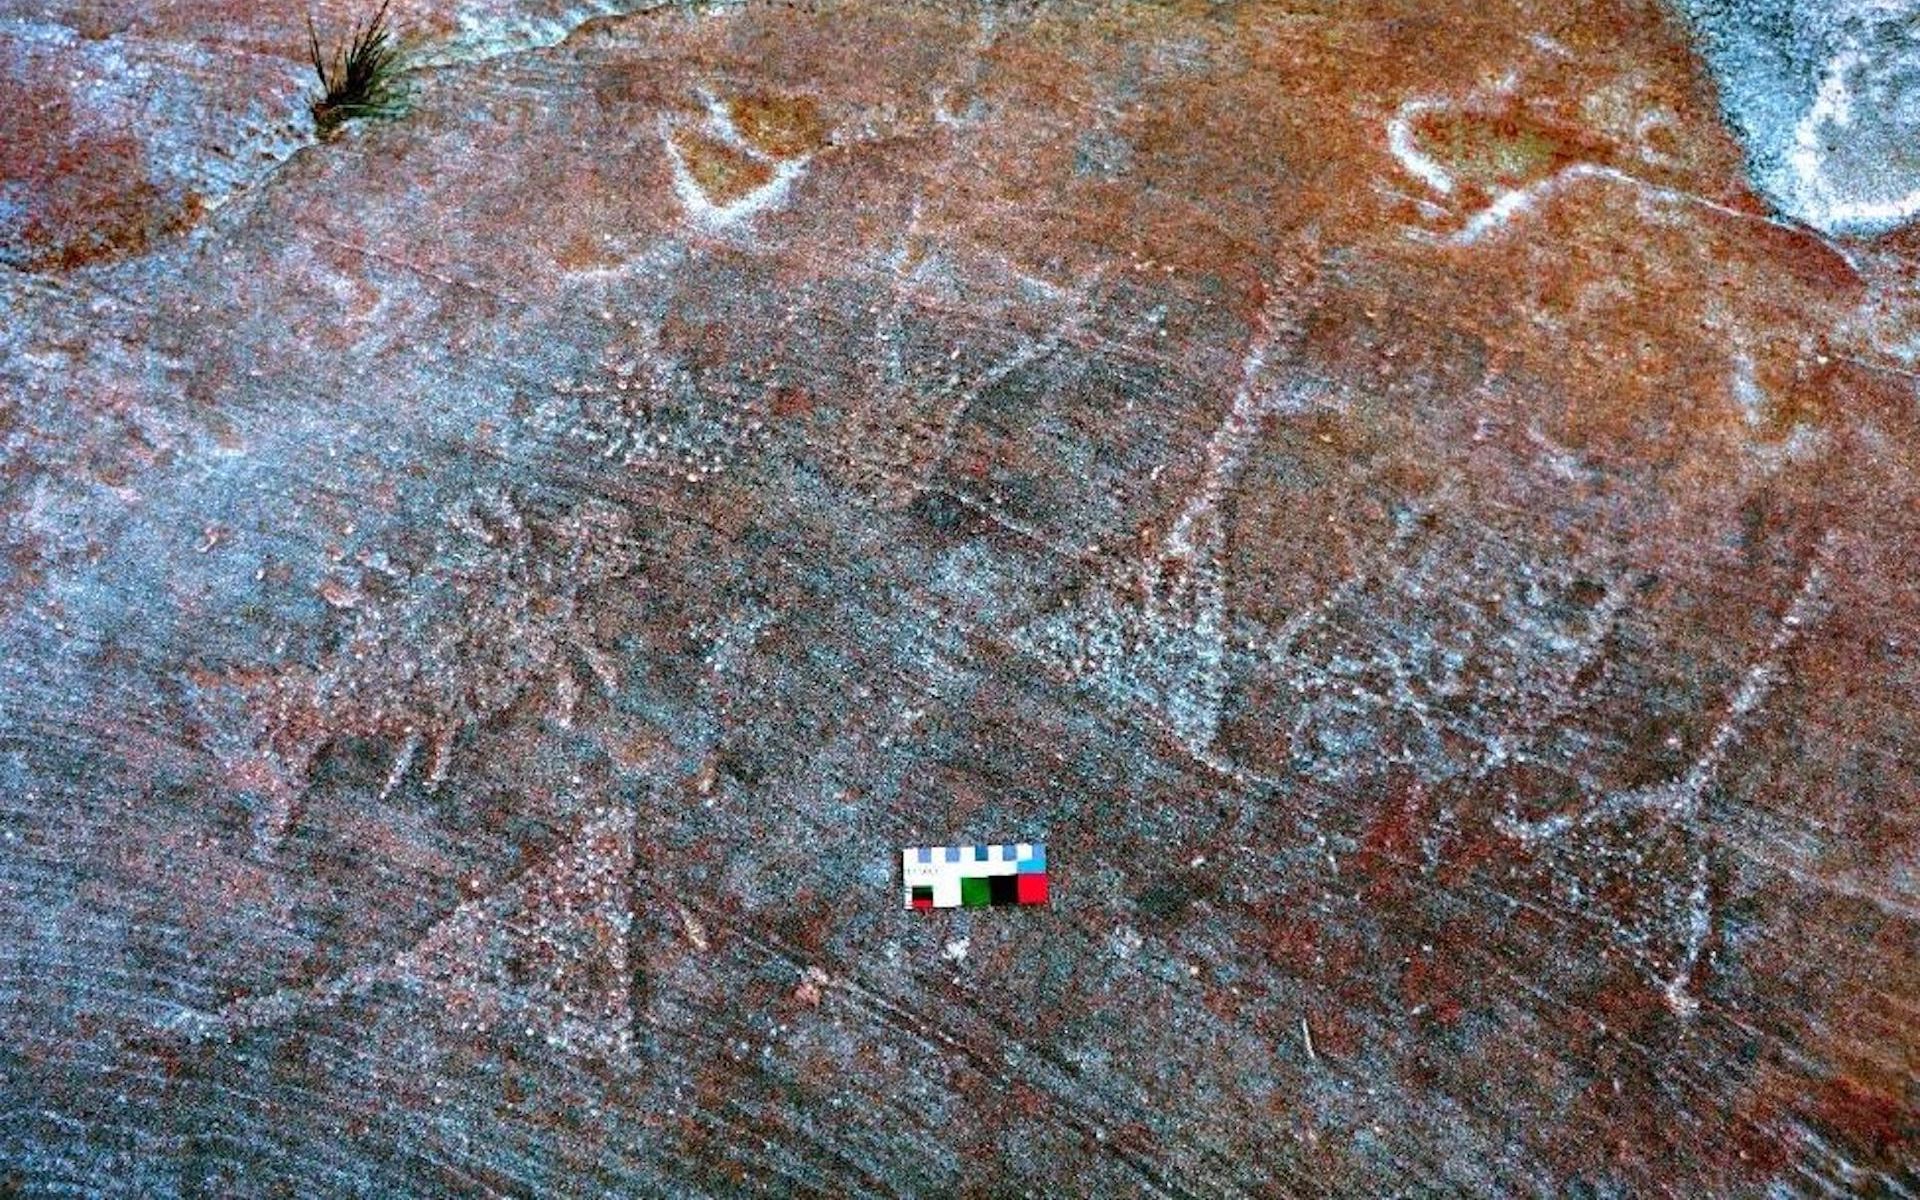 This image shows some of the petroglyphs, rock art that is incised into the rock. 